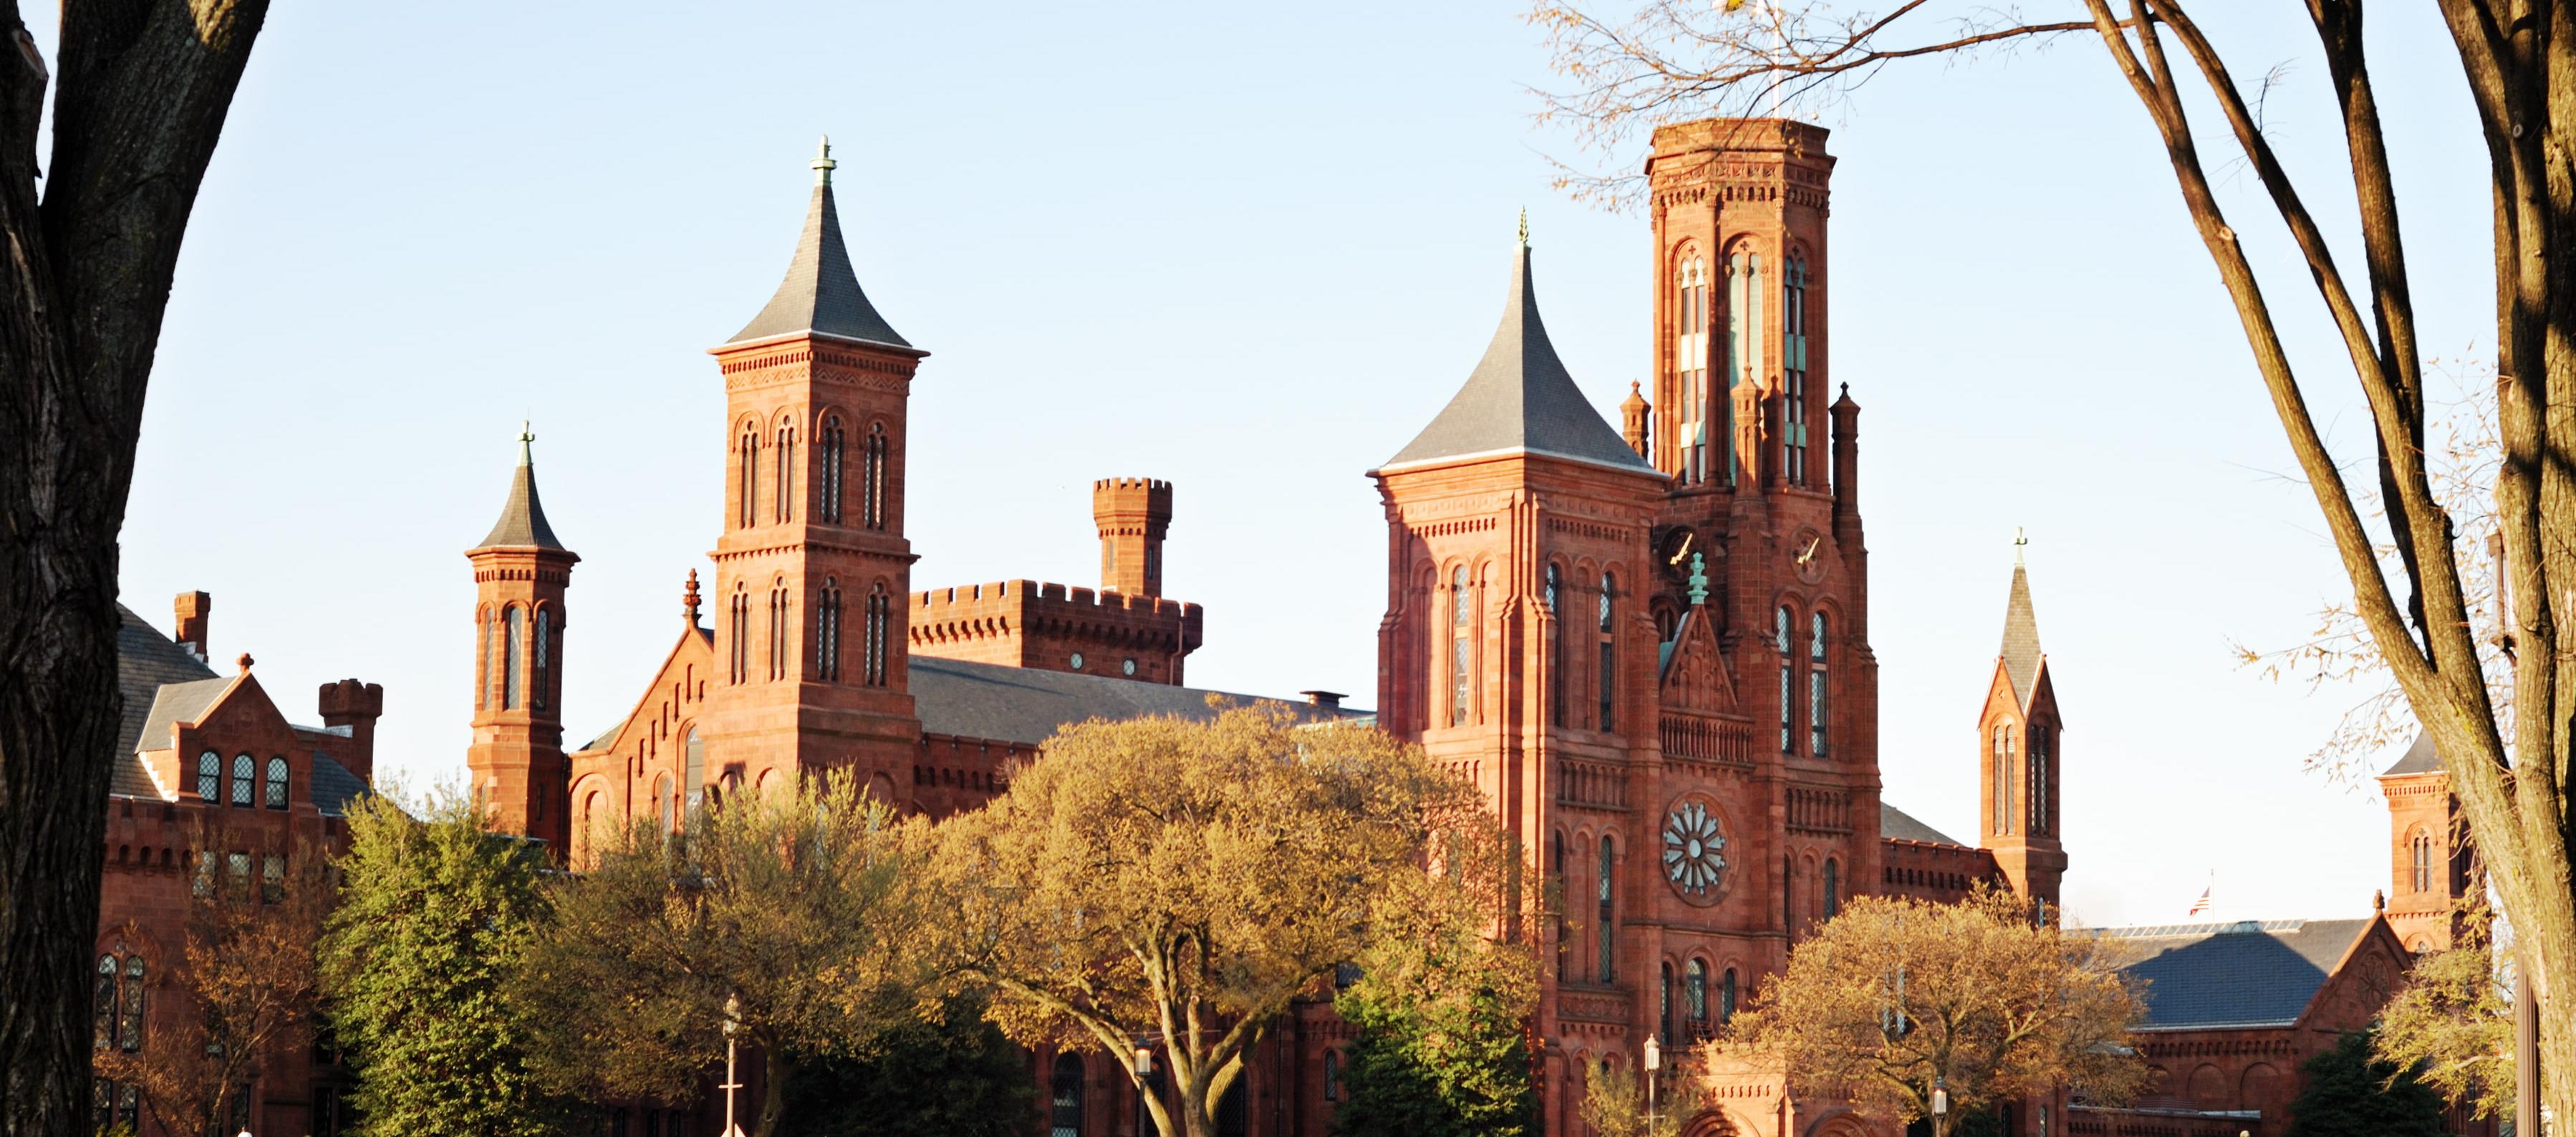 Smithsonian Castle, Red stone building with towers